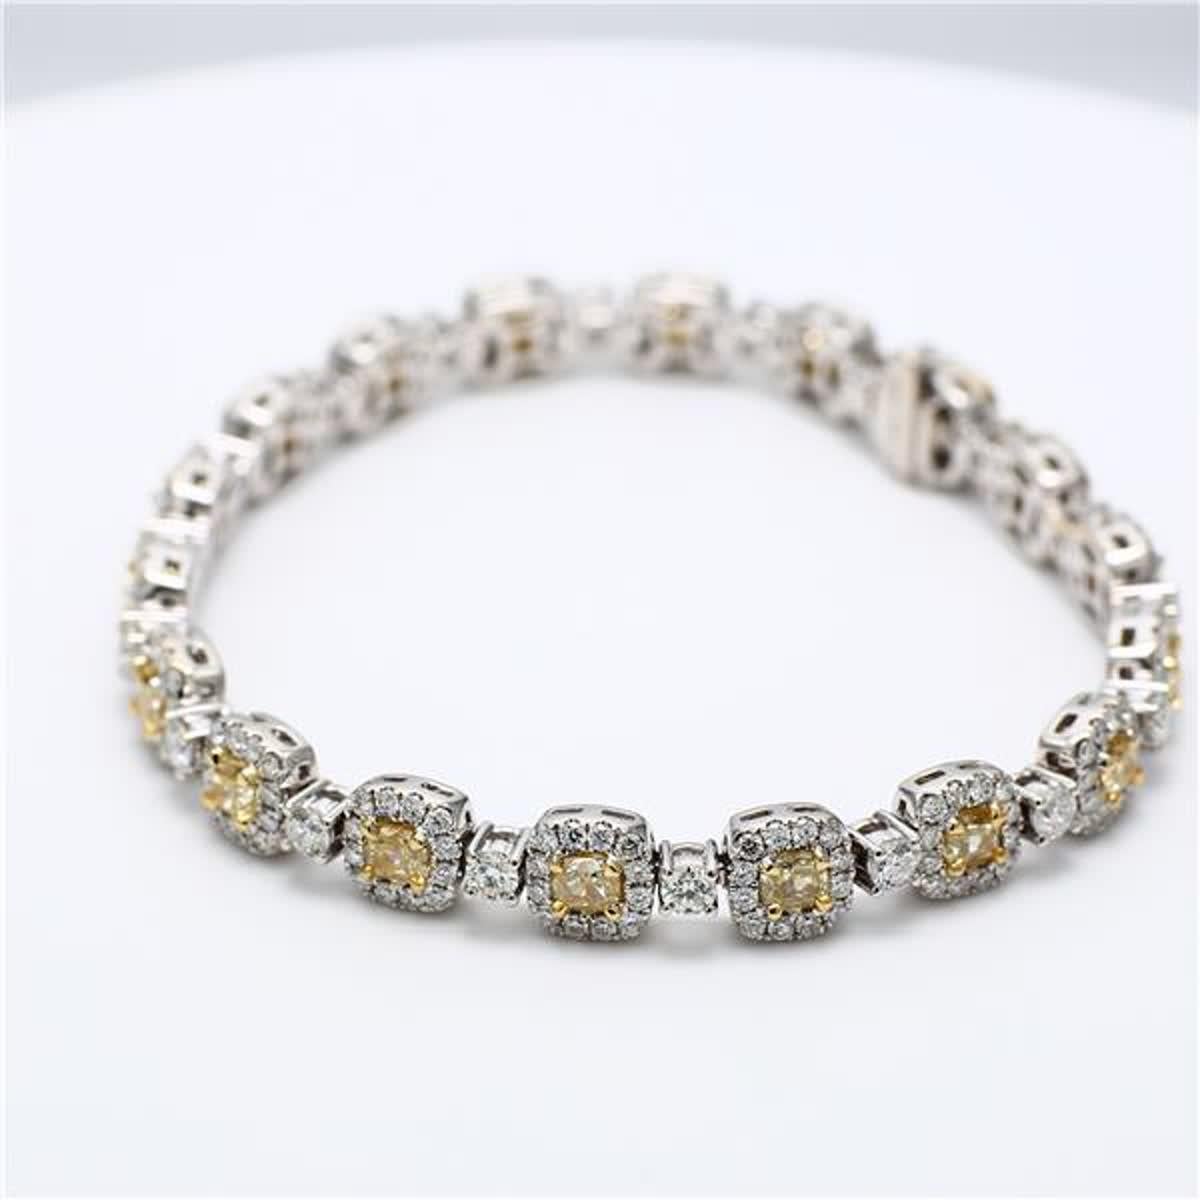 Contemporary Natural Yellow Cushion and White Diamond 7.21 Carat TW Gold Bracelet